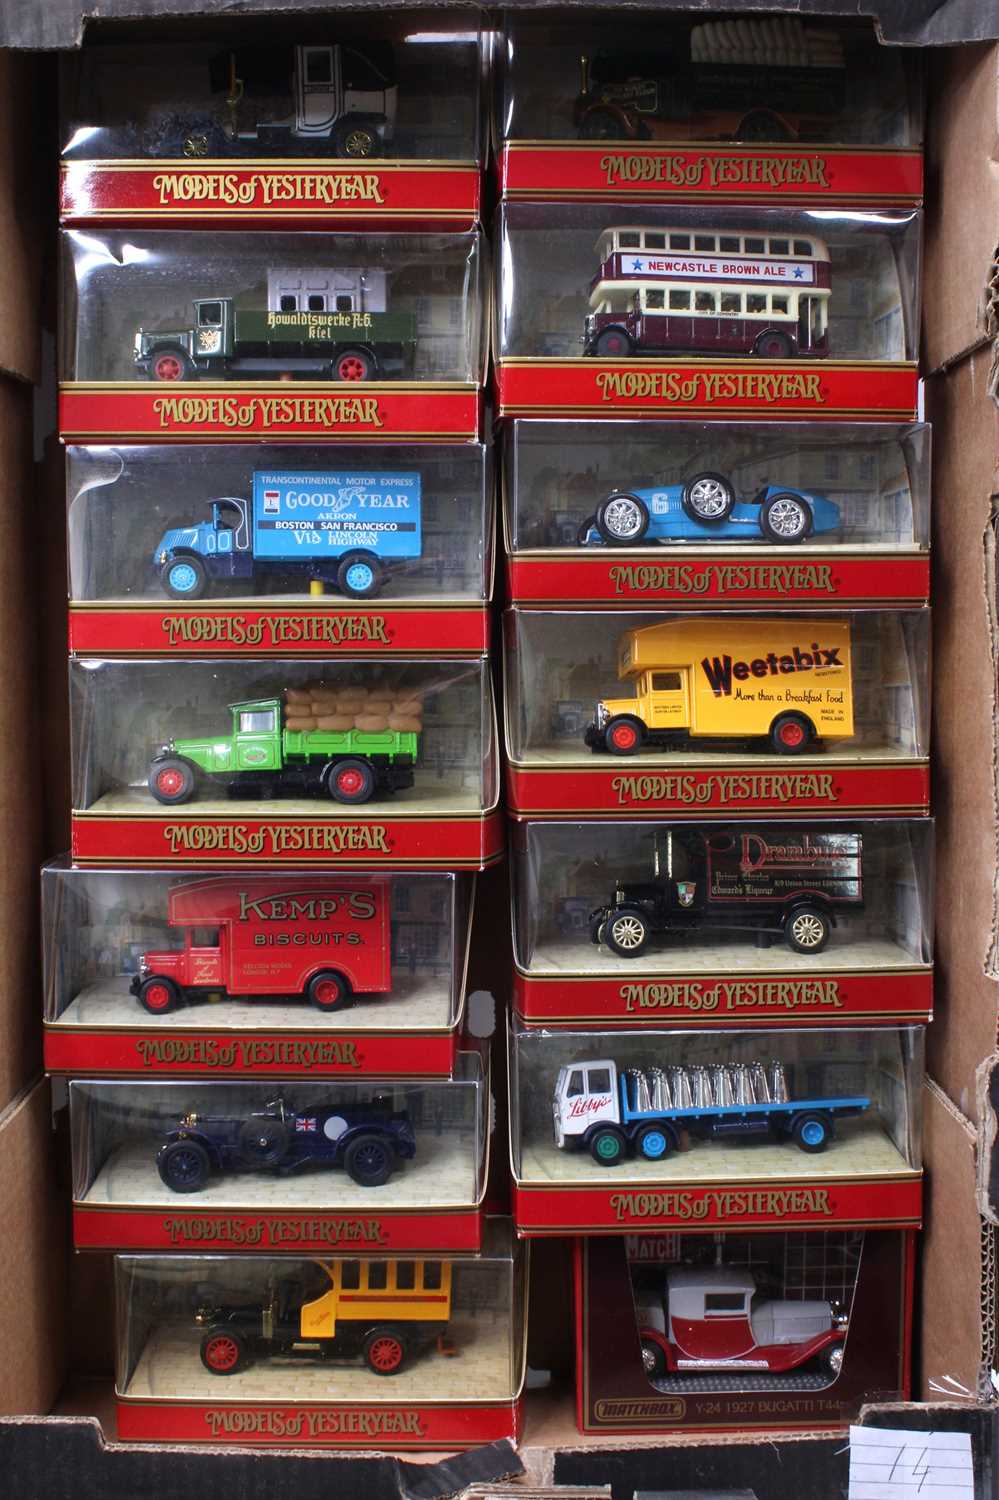 42 various boxed Matchbox Models of Yesteryear, all housed in original red ground window boxes to - Image 2 of 4